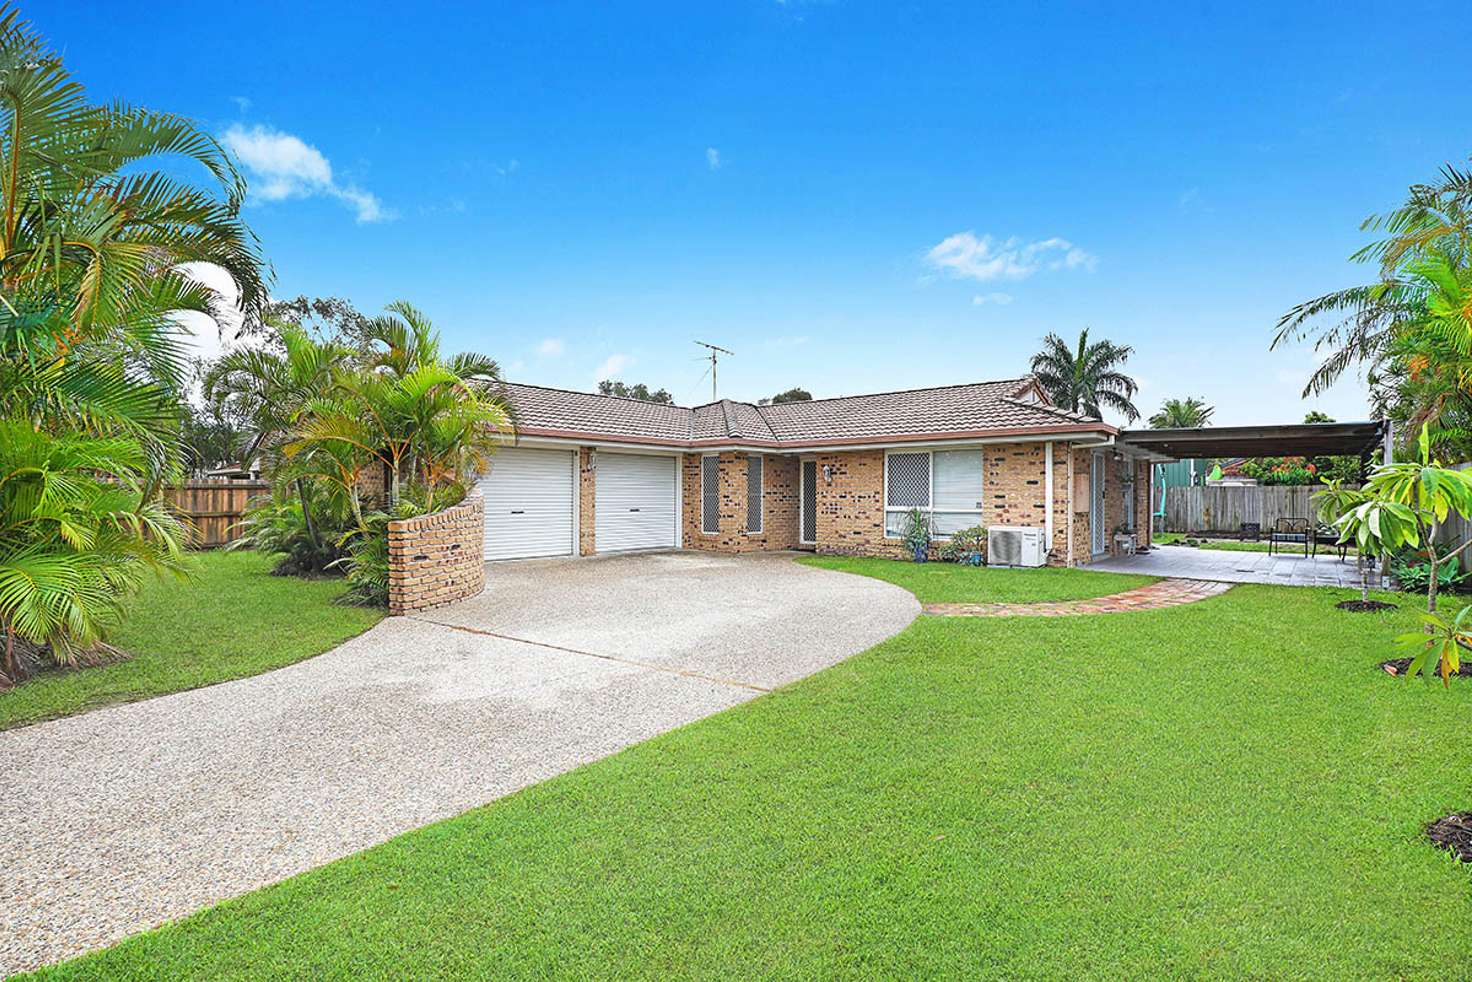 Main view of Homely house listing, 25 Saffron Dr, Currimundi QLD 4551